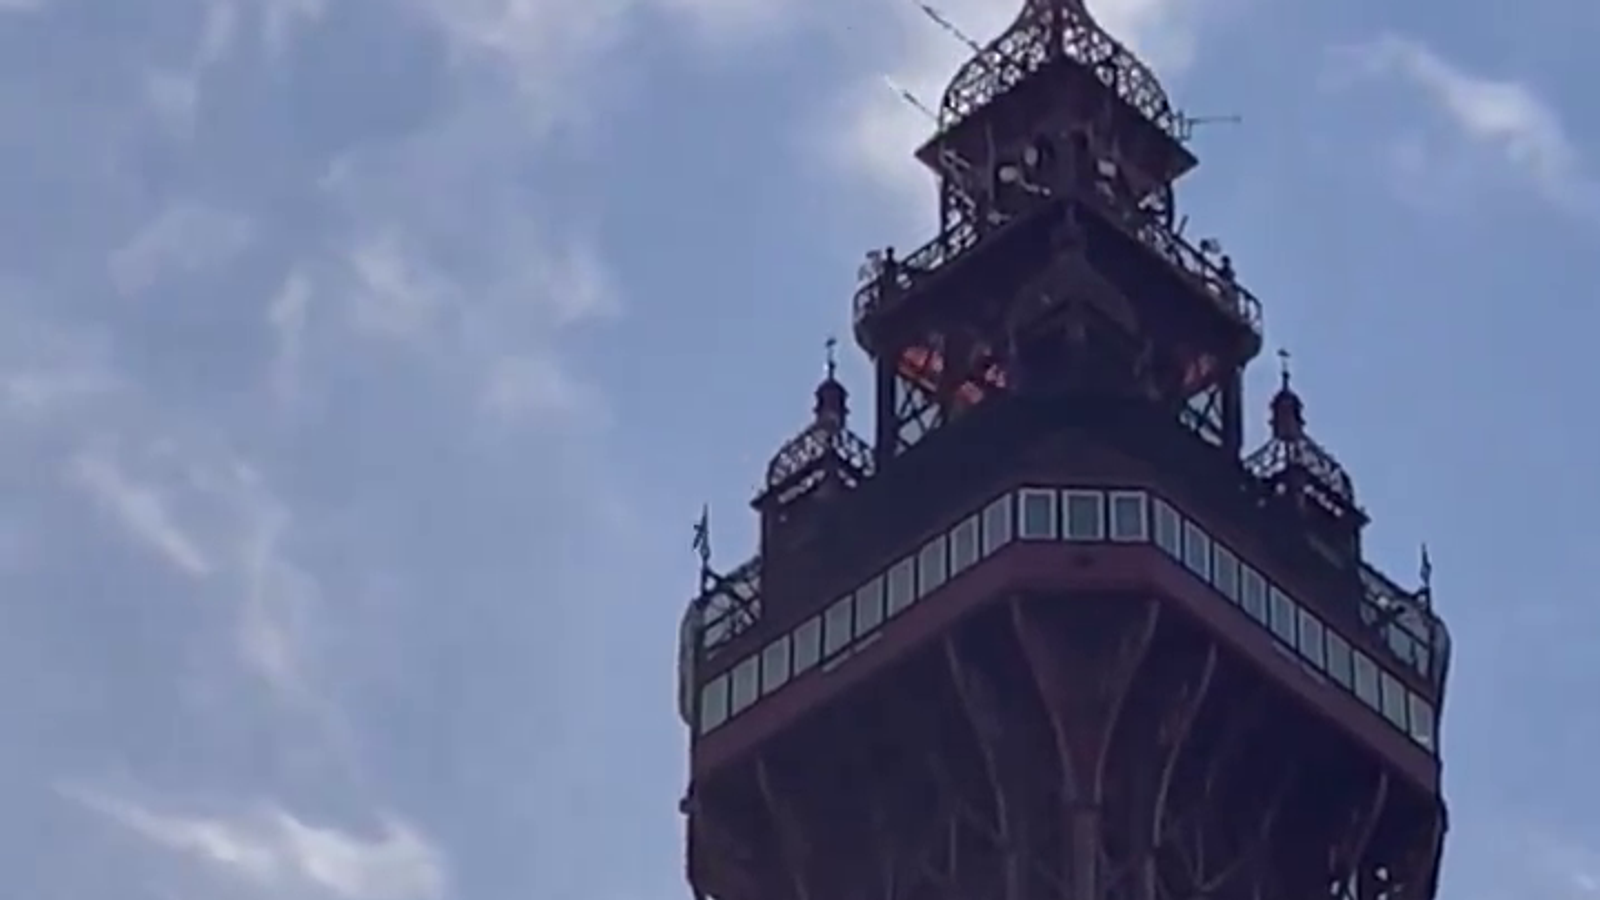 Blackpool Tower 'fire': Police helicopter using thermal imaging discovers 'blaze' is actually just orange netting blowing in wind